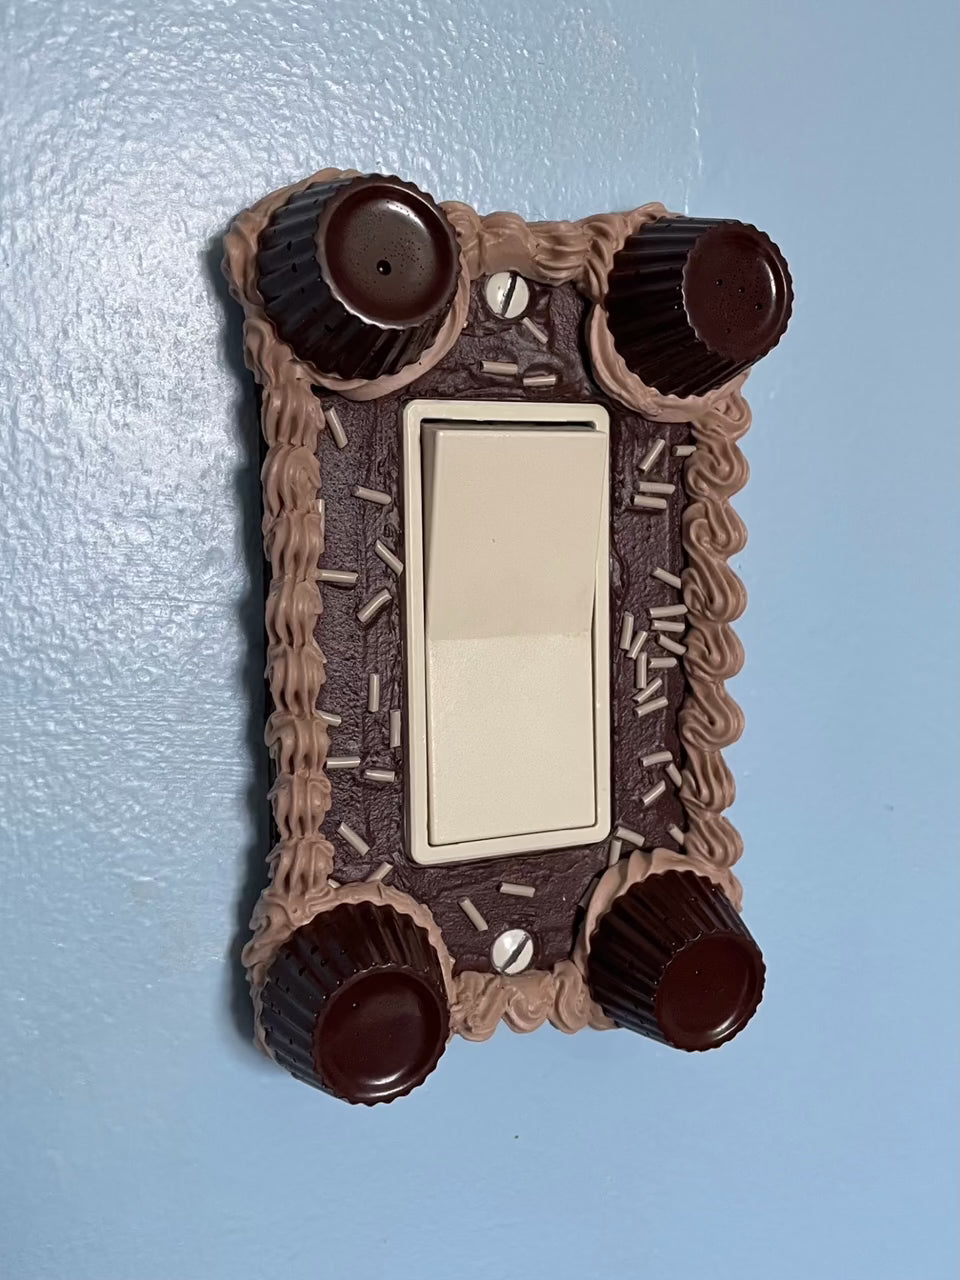 a light switch with a light switch plate decorated to look like a chocolate cake